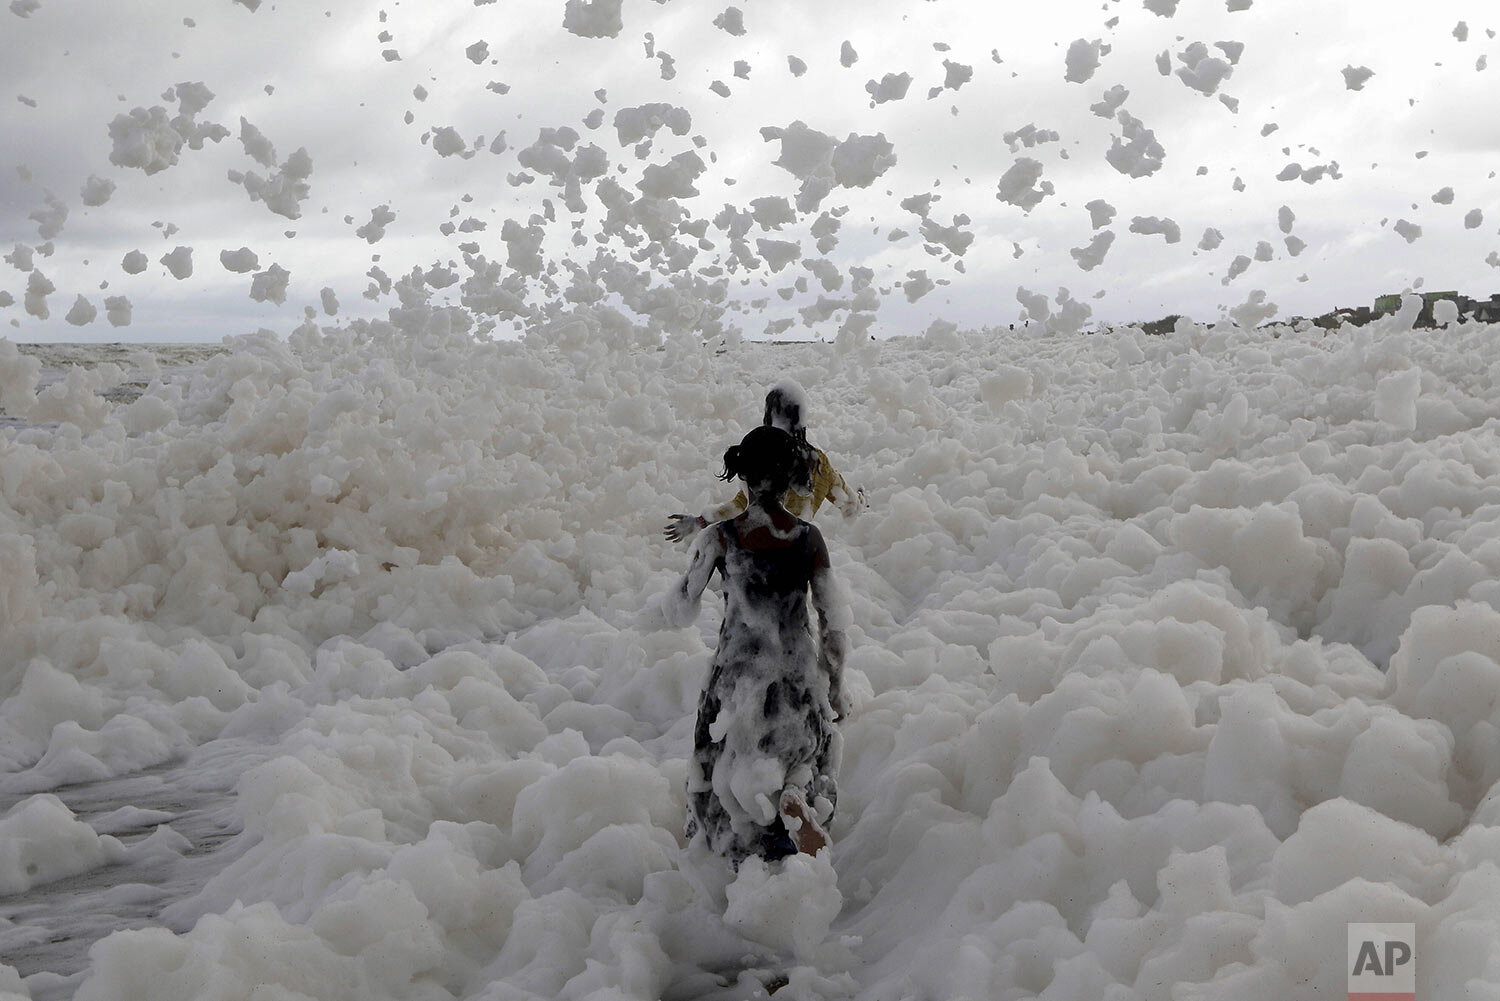  Children play on the Marina beach on the Bay of Bengal coast which is blanketed in sea foam in Chennai, India, Sunday, Dec. 1, 2019. (AP Photo/R.Parthibhan) 